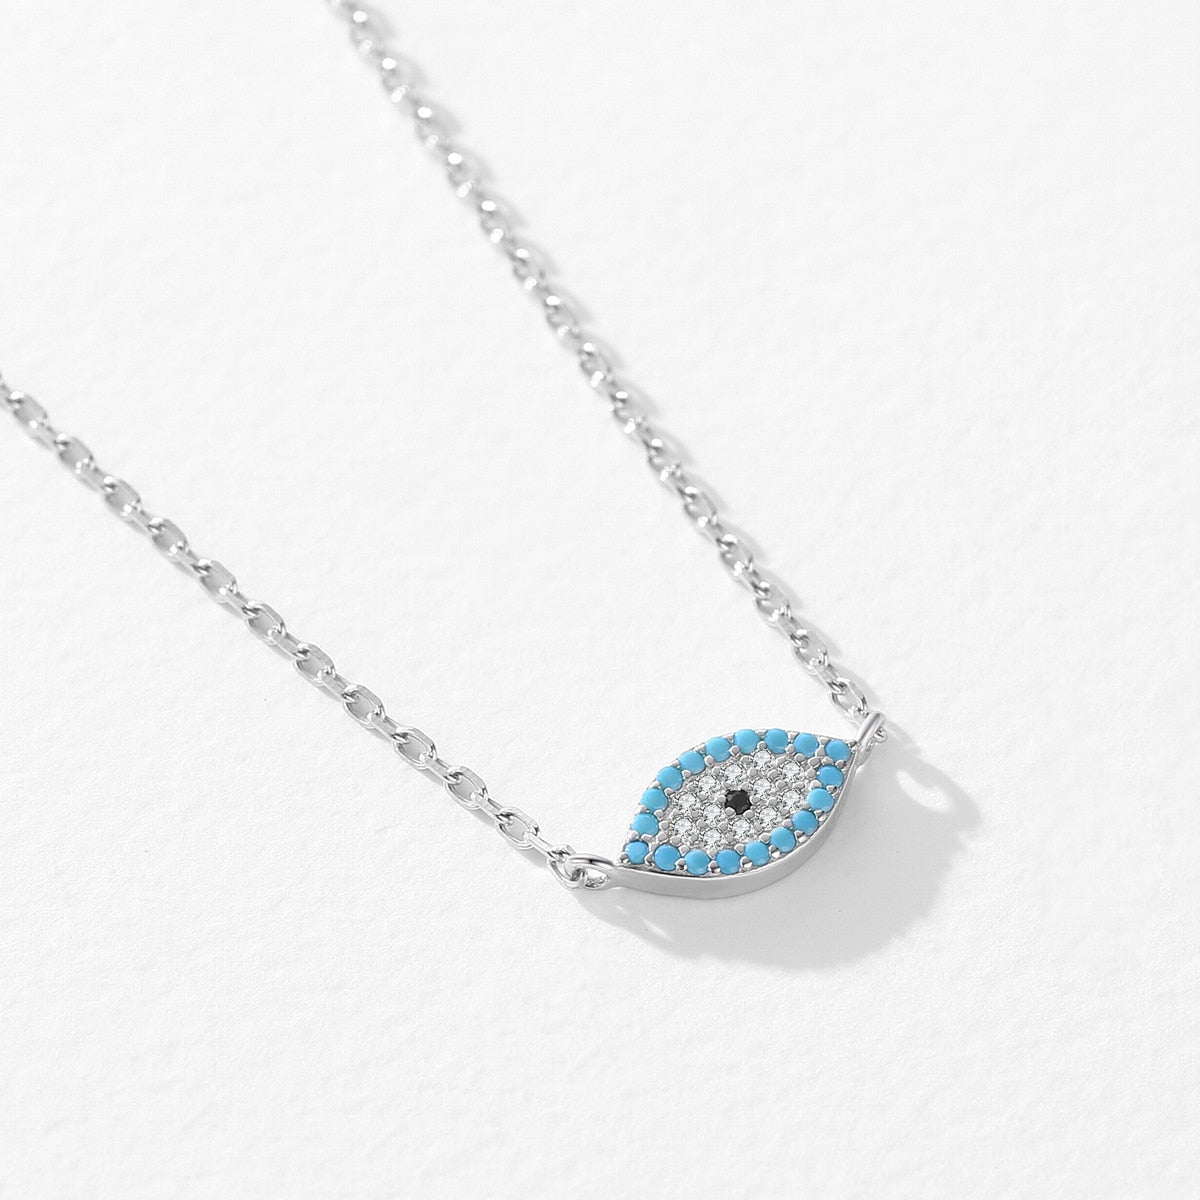 Natural Stones Blue Turquoise Eye Necklace